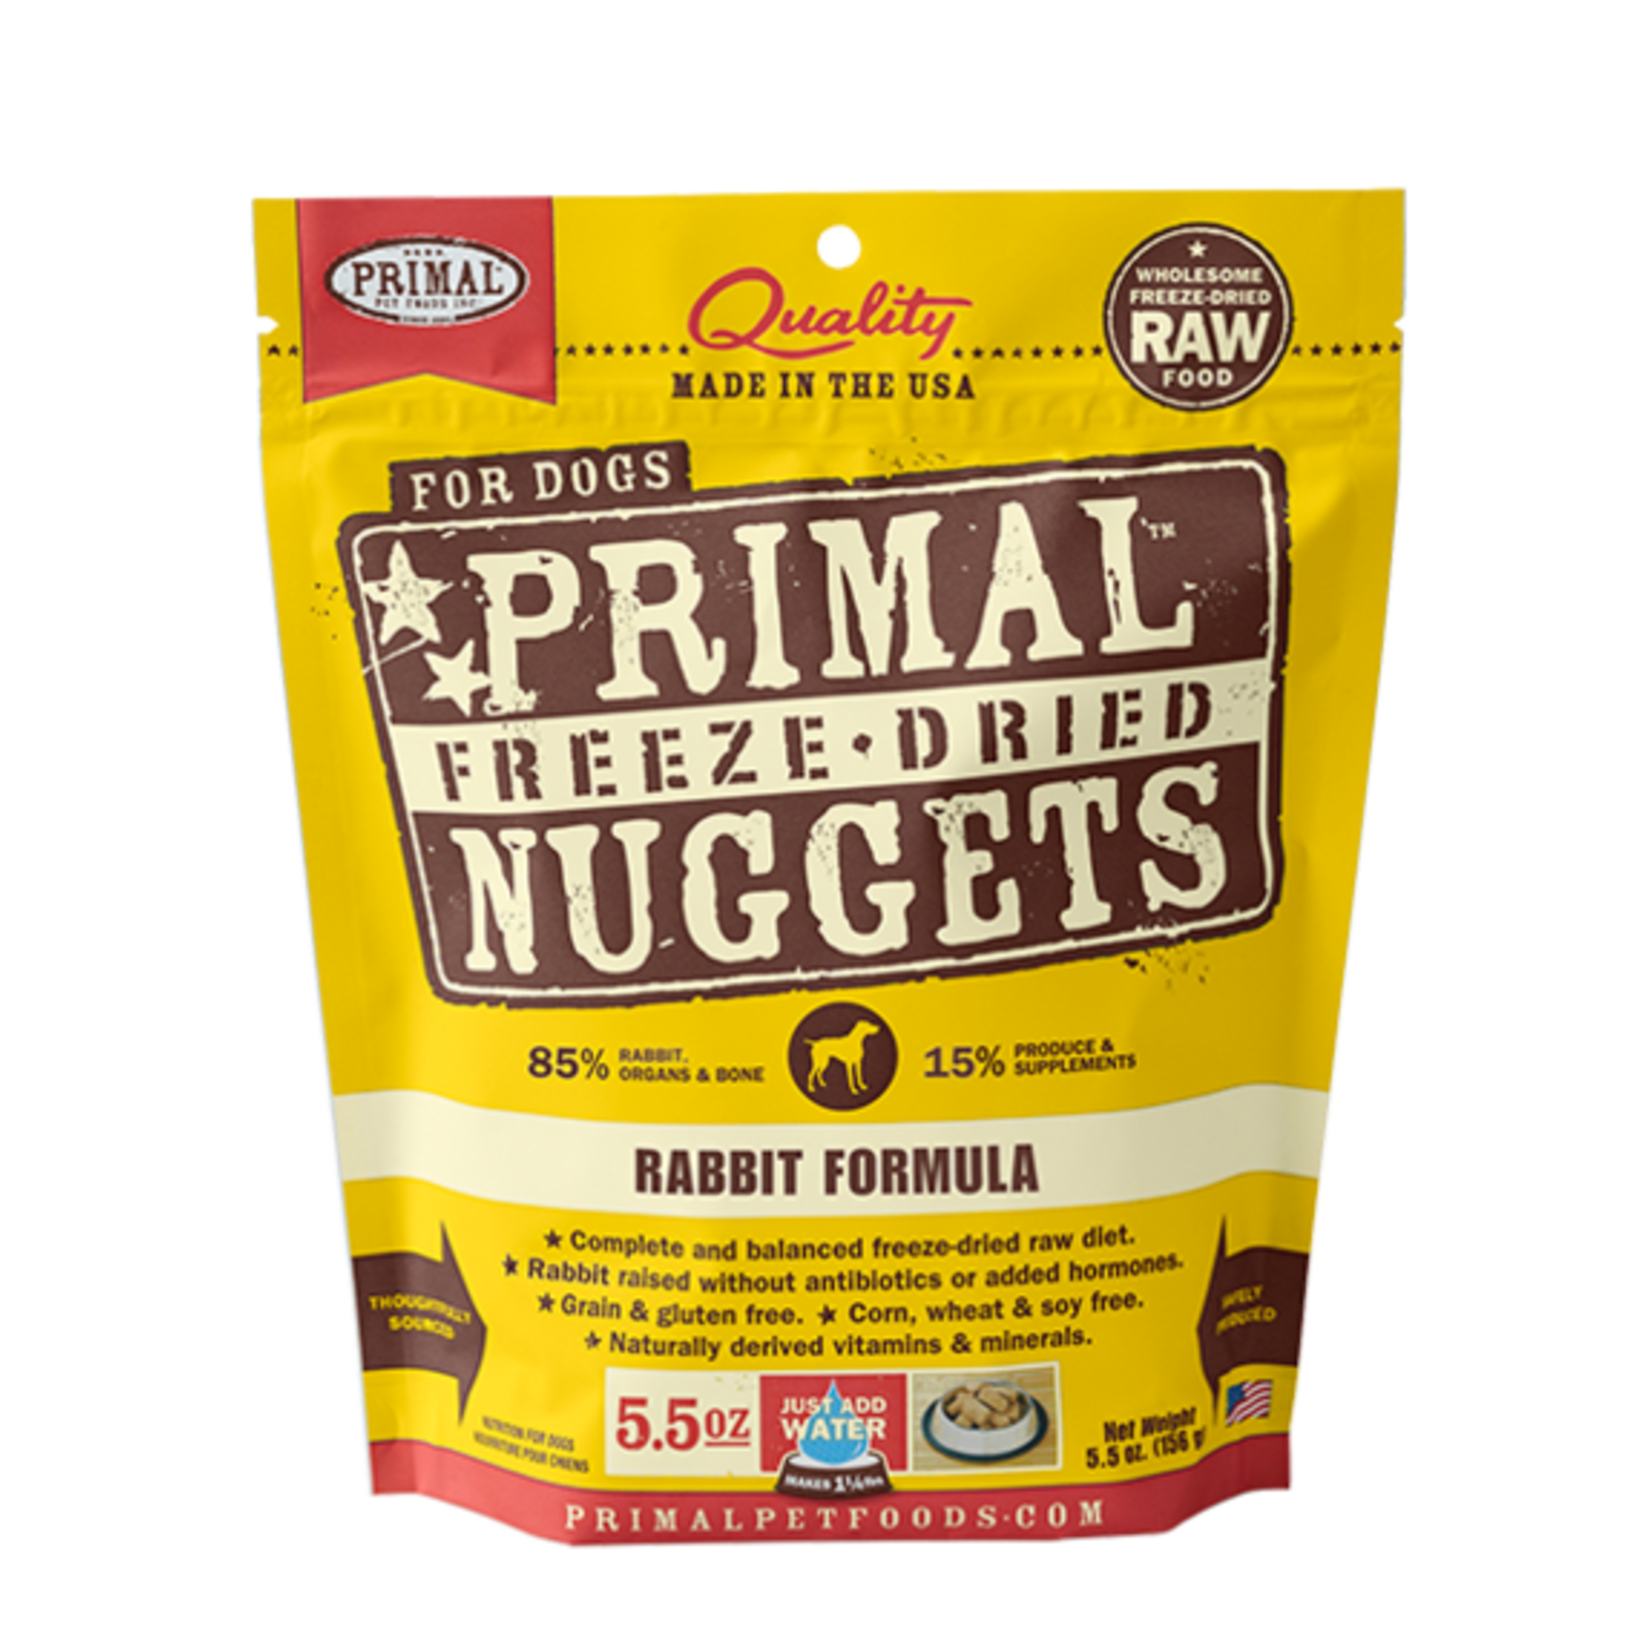 Primal Pet Foods Primal Canine Raw Freeze-Dried Nuggets Rabbit